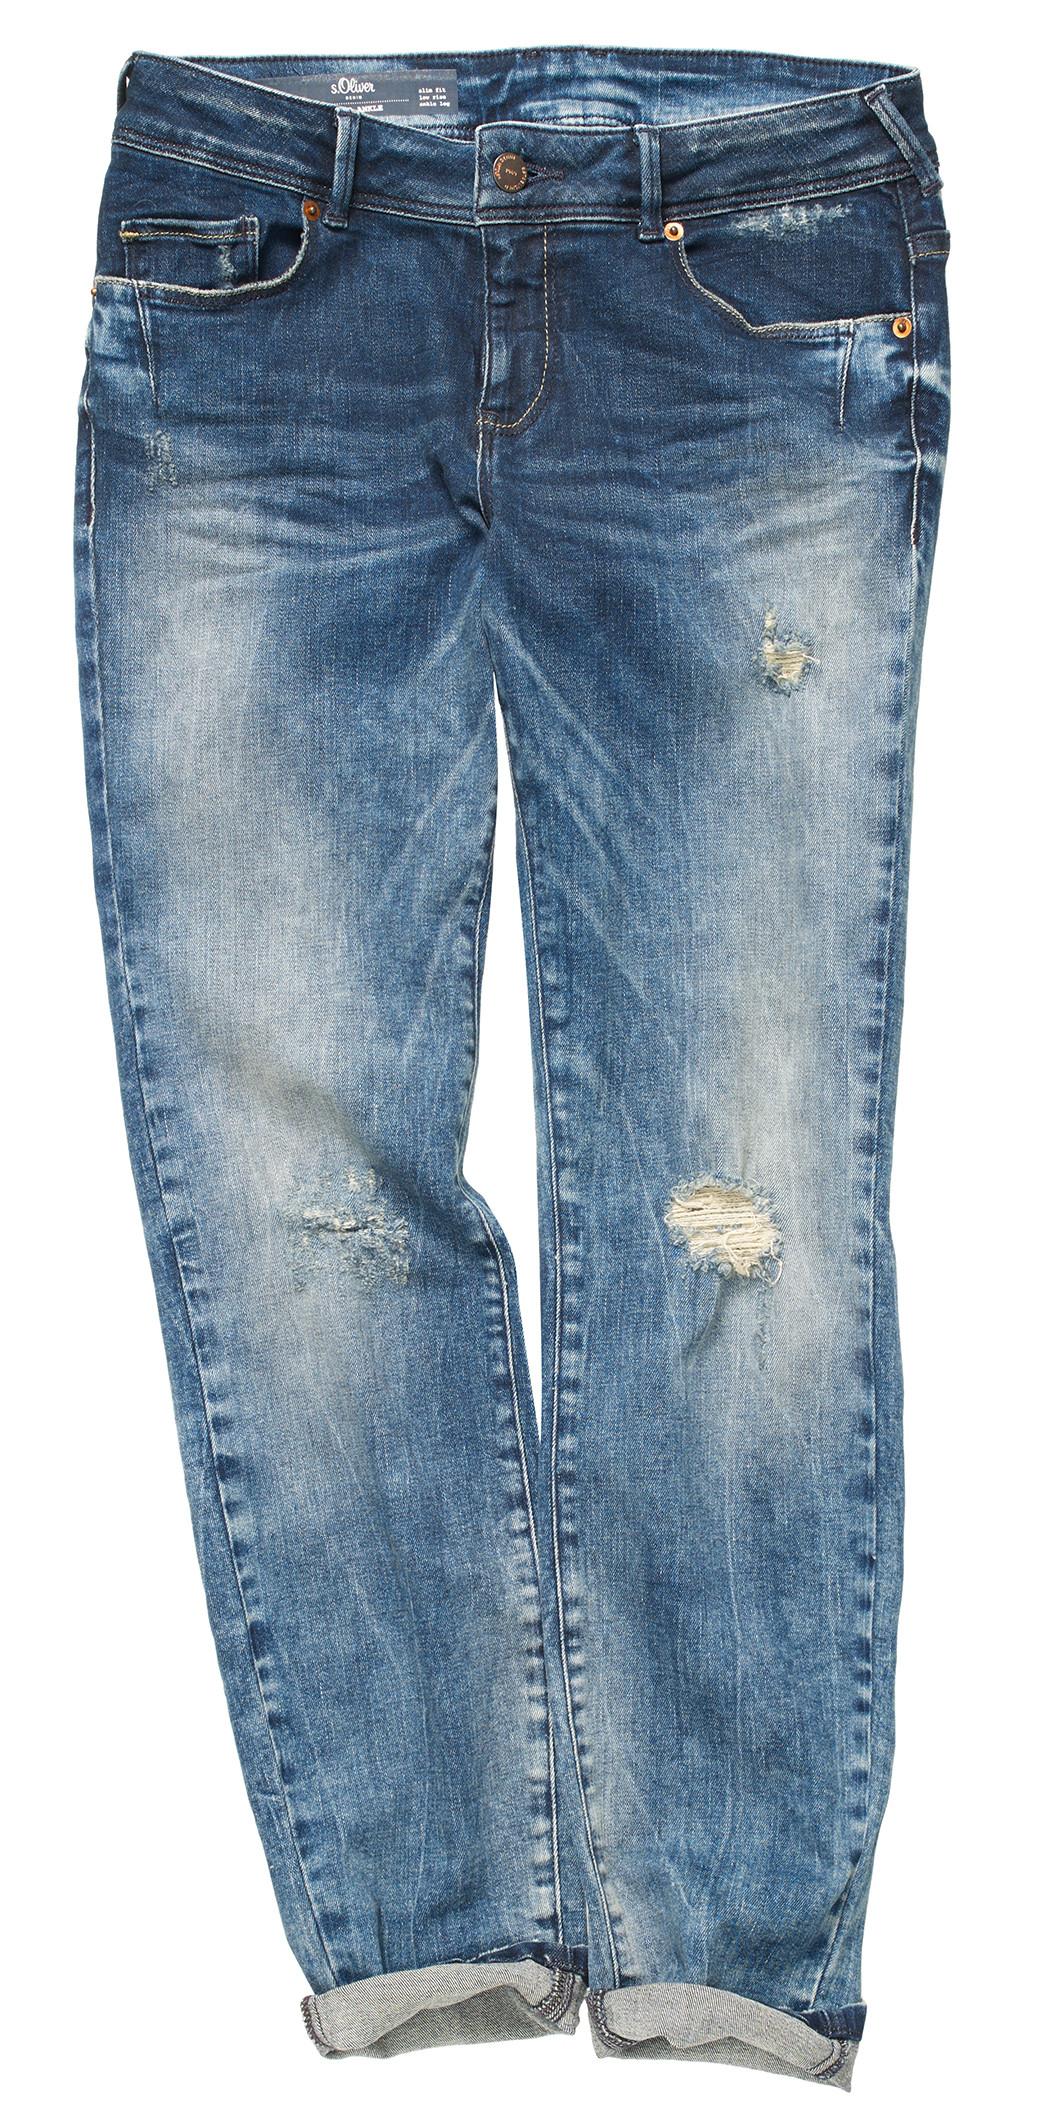 Jeans - s.Oliver - 79,99 euro